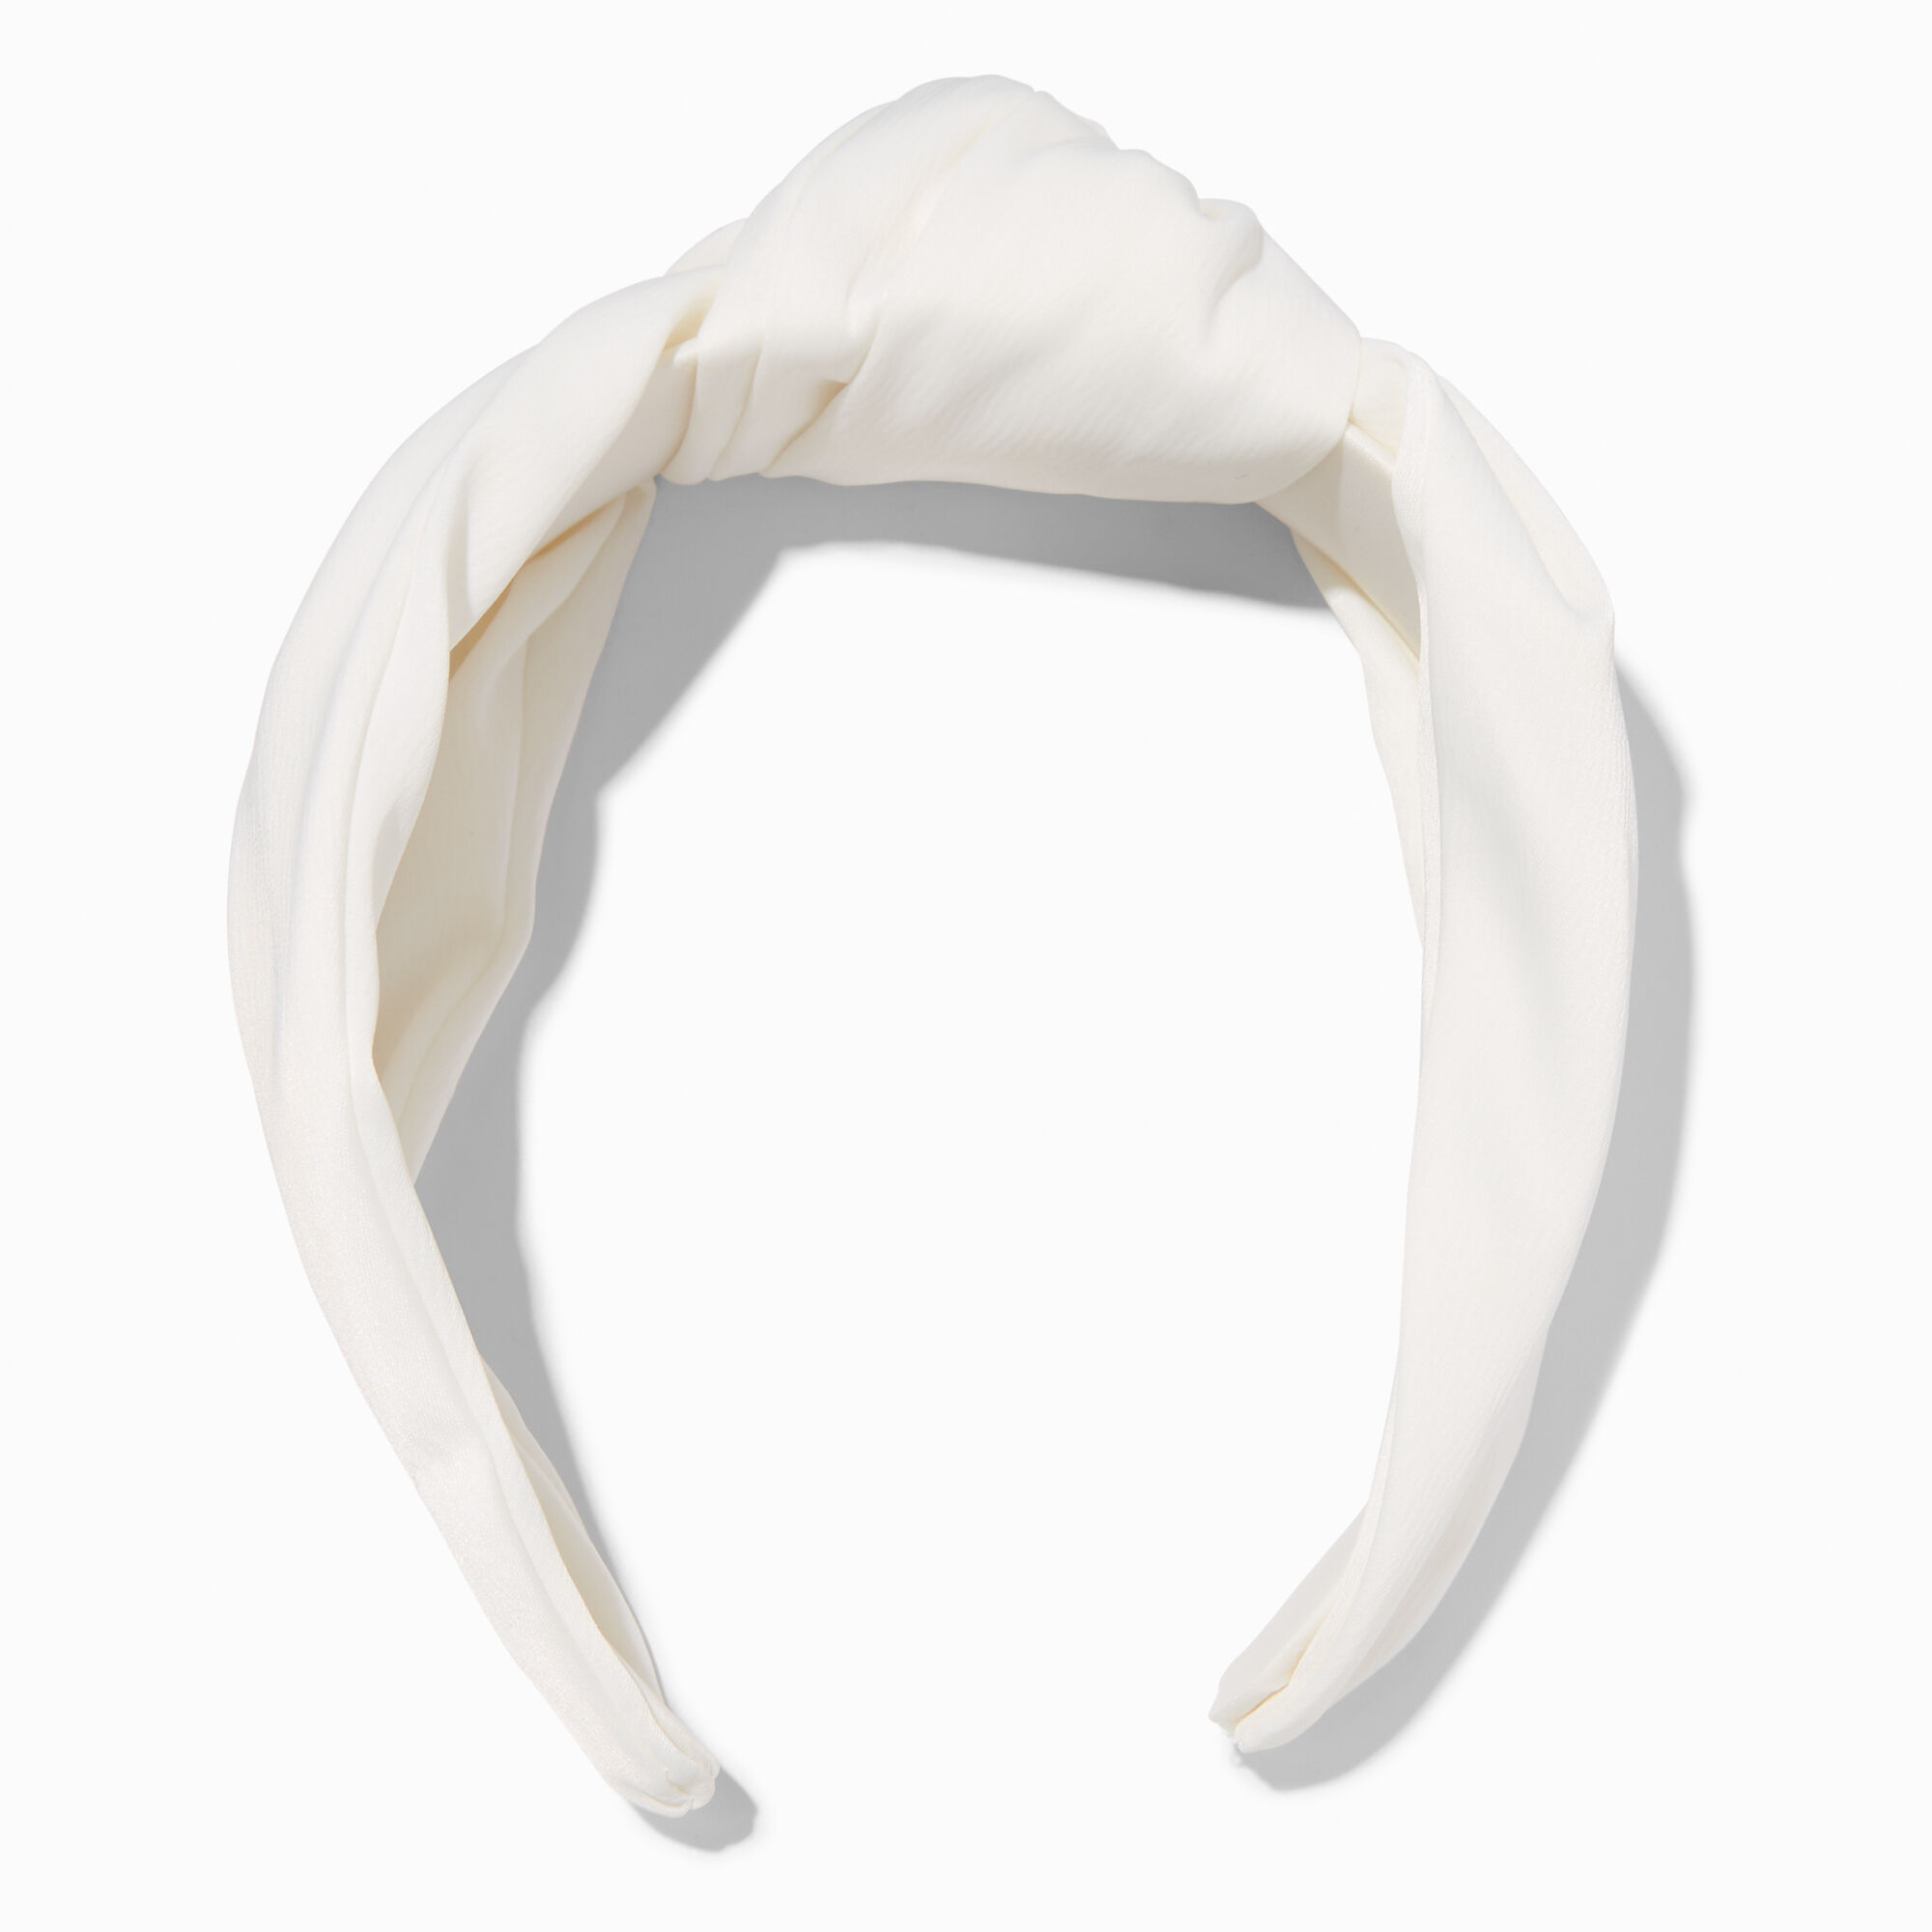 View Claires Silk Knotted Headband White information